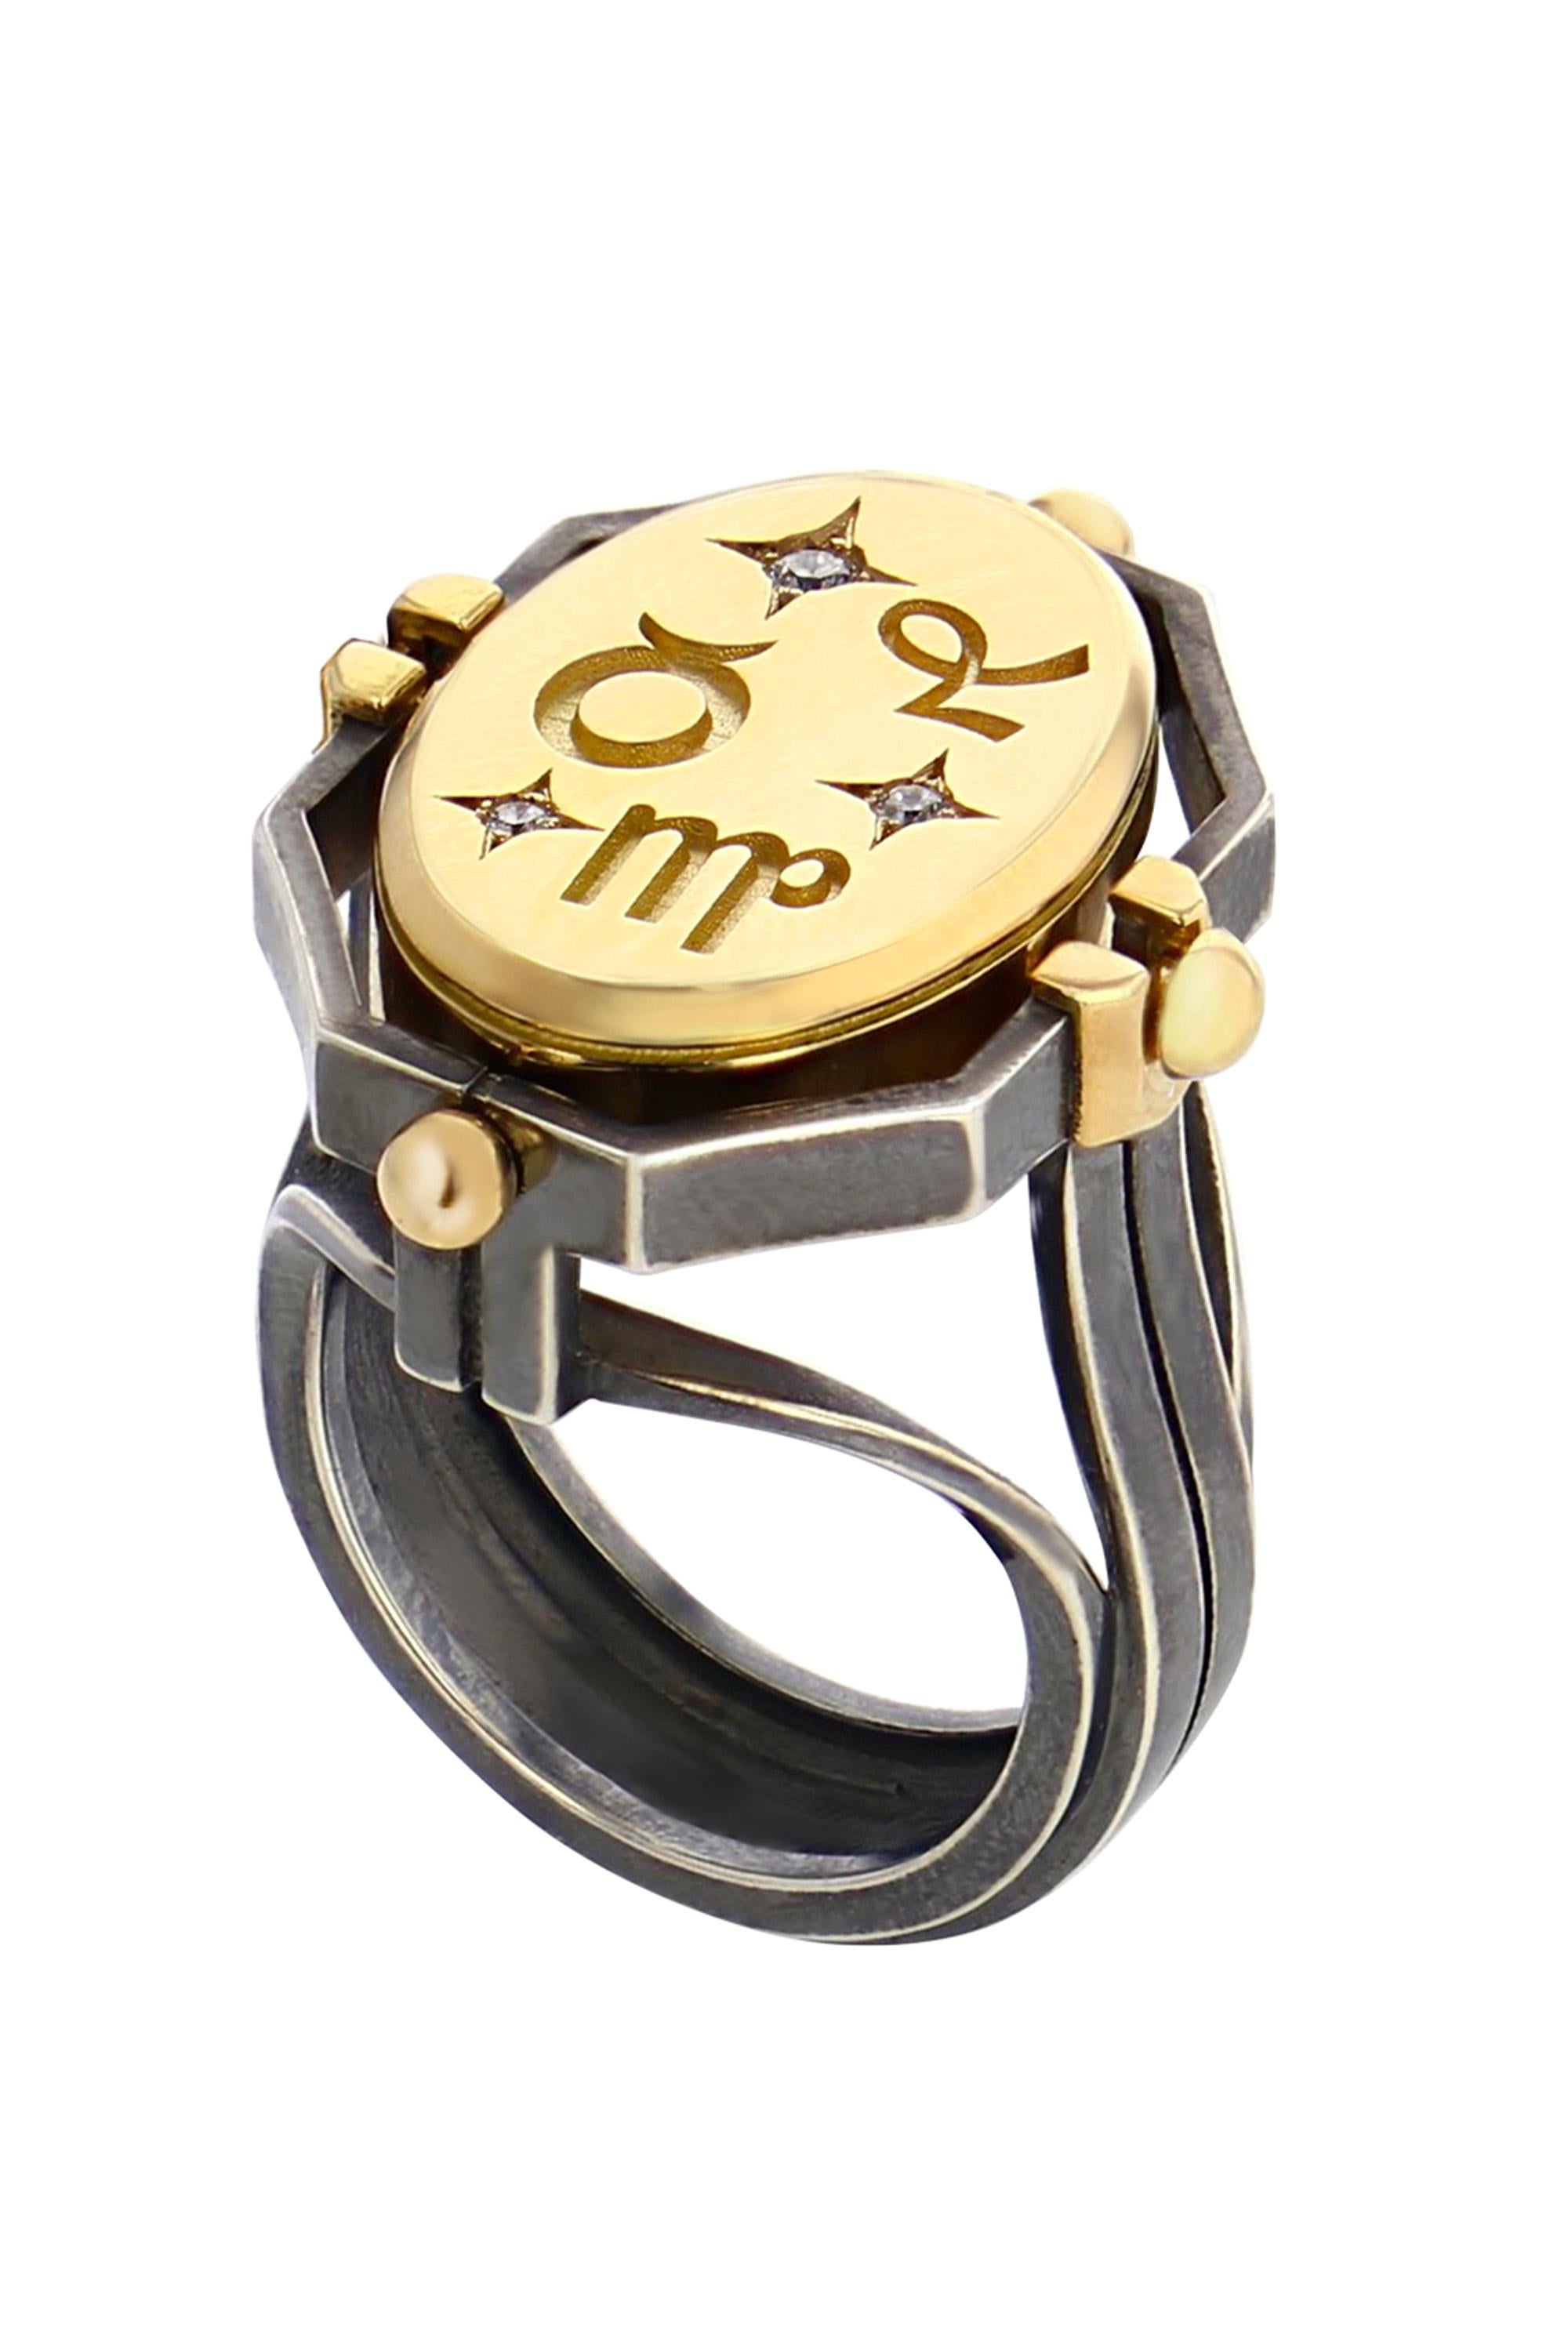 Yellow gold and distressed silver ring. Rotating medallion: on the gold side are engraved Earth signs (Virgo, Capricorn, Taurus) and on the onyx, a lion.

Details: 
Onyx 
18k Yellow Gold: 10 g
Distressed Silver: 8 g
3 Diamonds: 0.03 cts
Made in